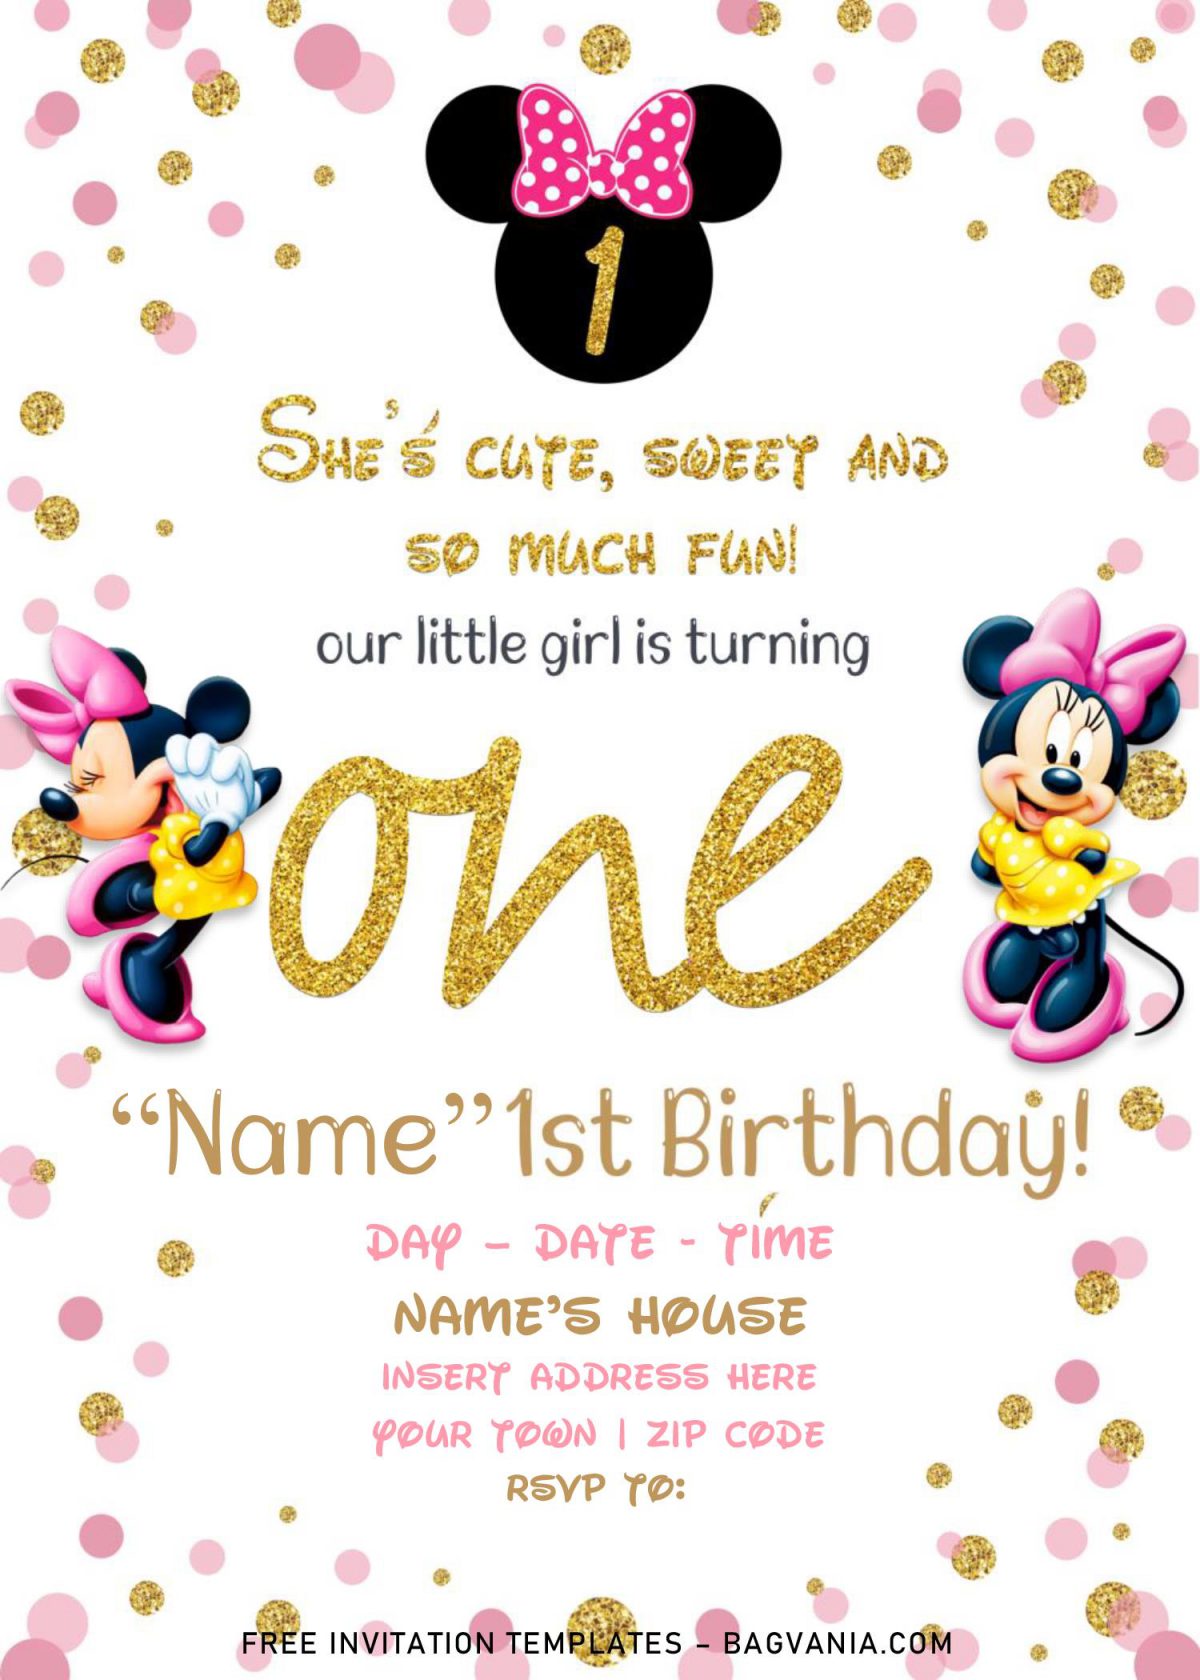 Free Sparkling Gold Glitter Minnie Mouse Birthday Invitation Templates For Word and has cute Minnie mouse in yellow dress